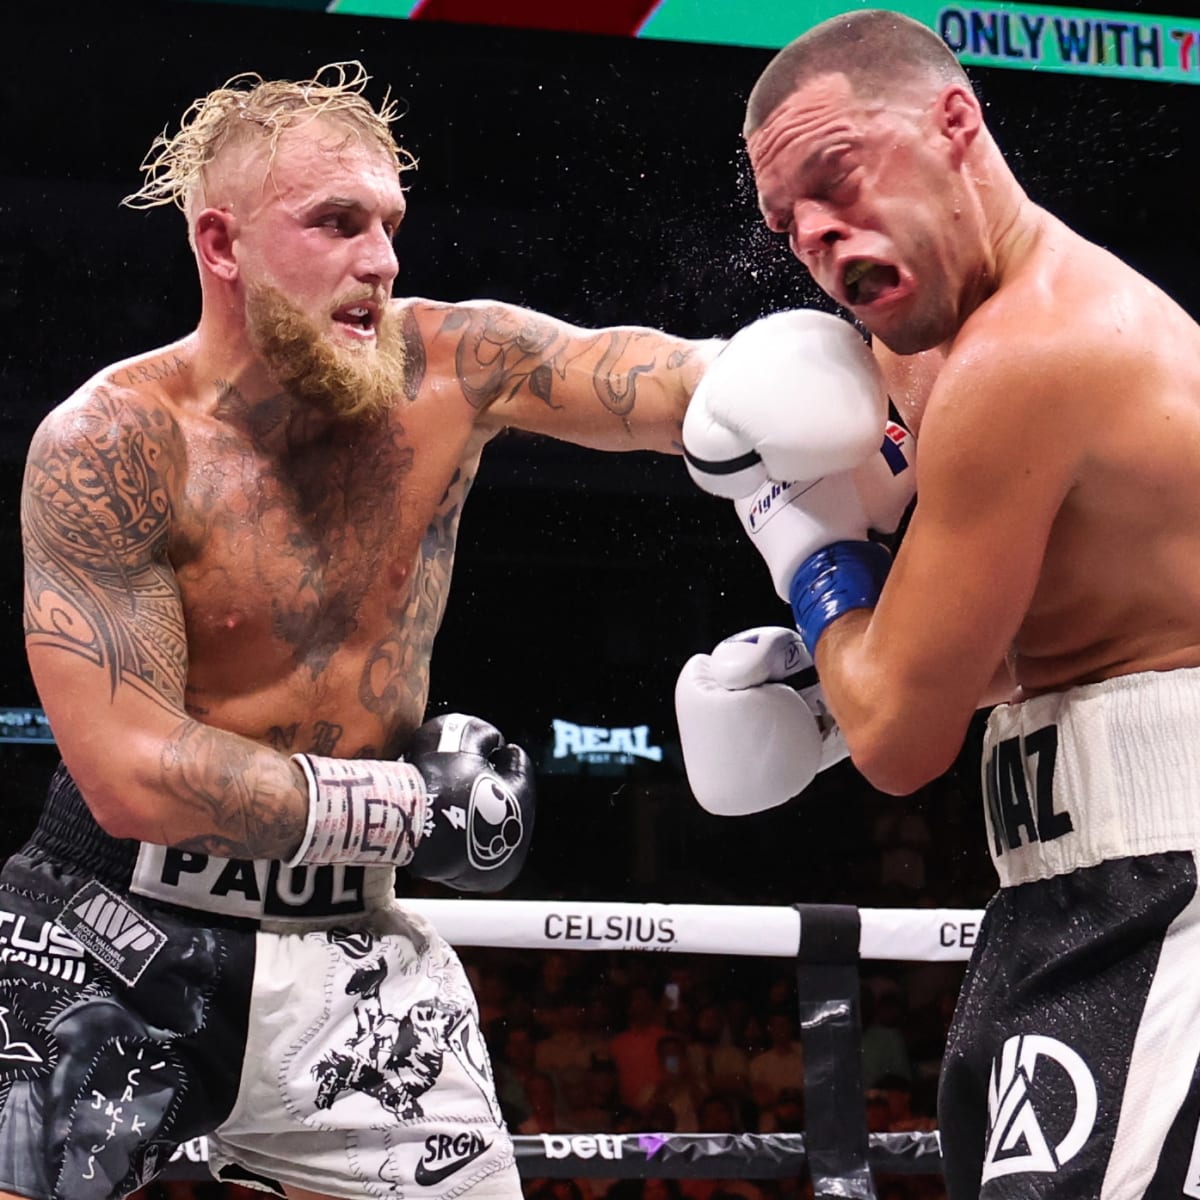 Jake Paul vs. Nate Robinson fight results, highlights: Paul scores